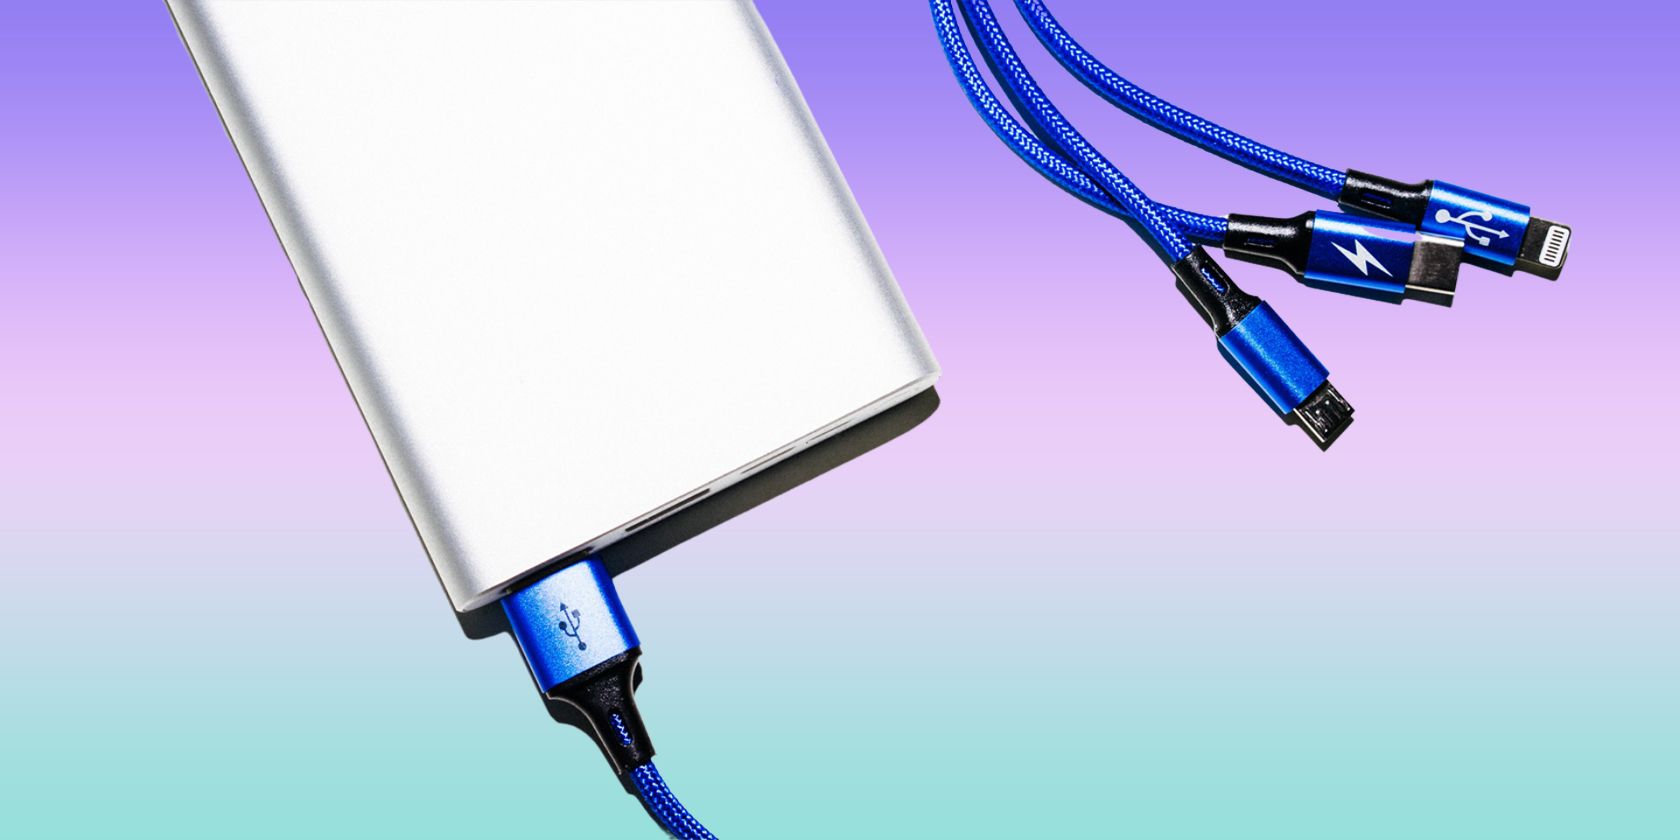 power bank with blue cables